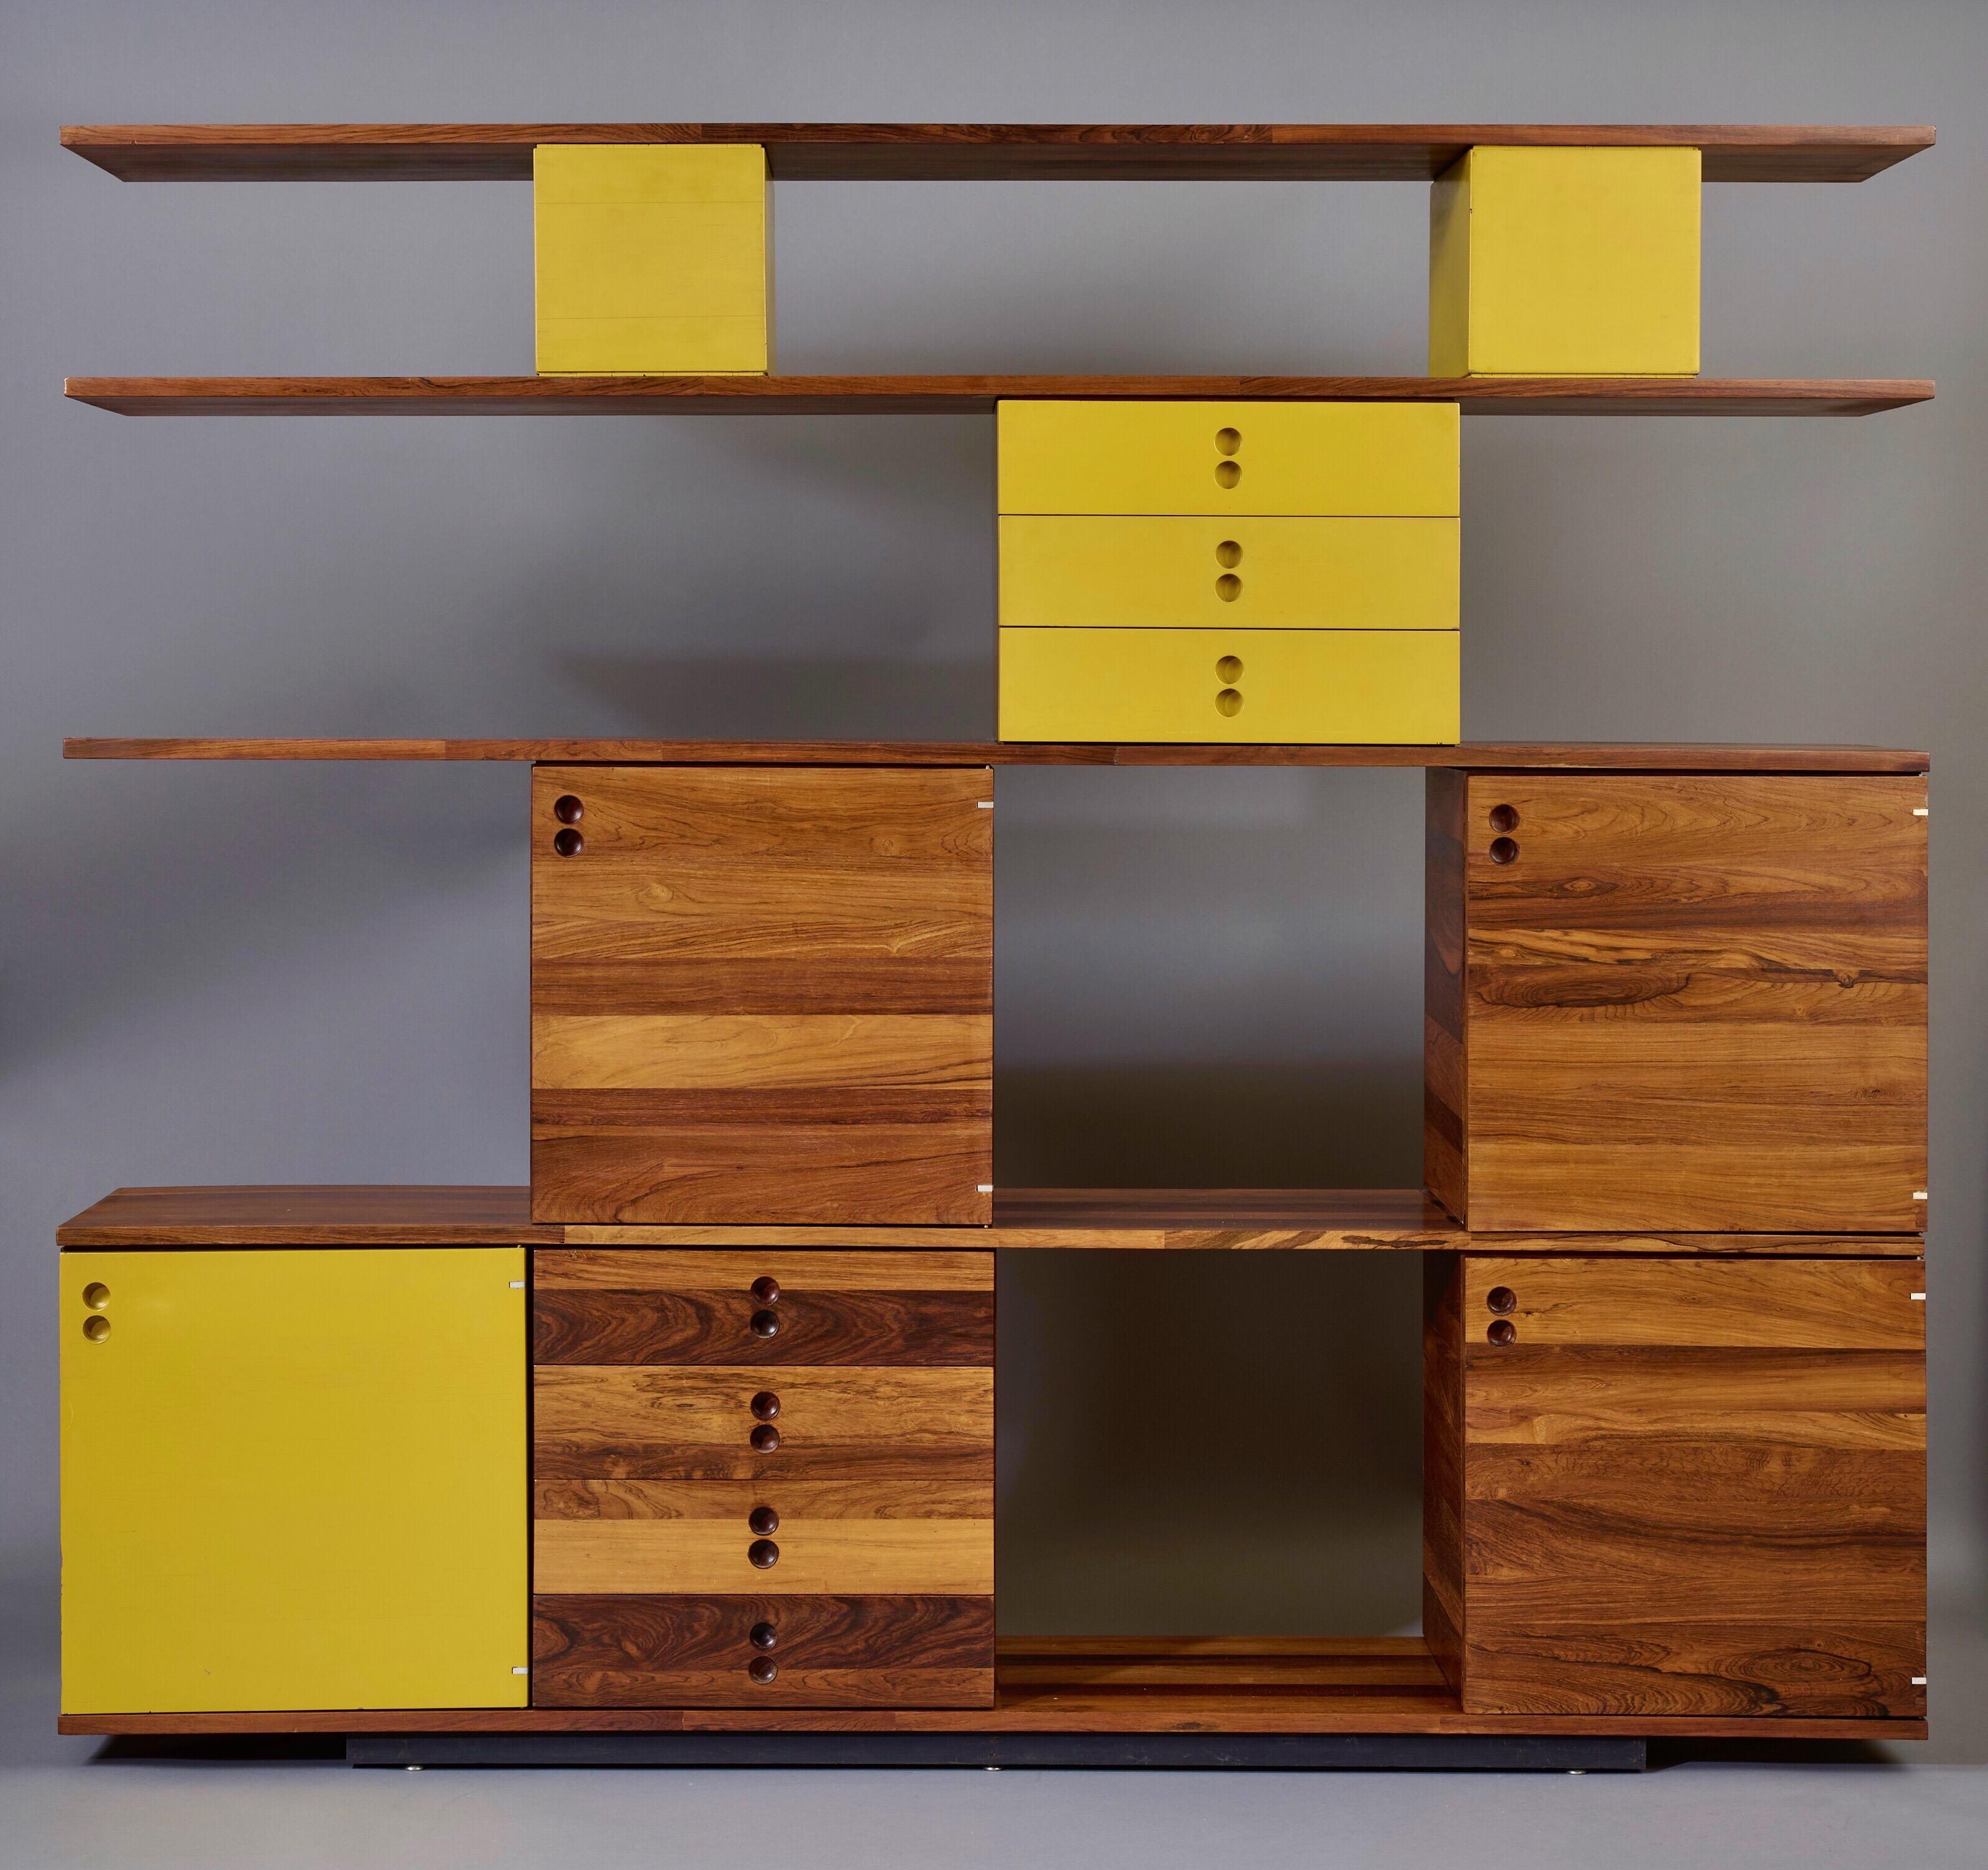 Jorge Zalszupin (1922 - 2020) 

A rare and important cabinet with bookcase and drawers by Jorge Zalszupin, in alternating striations of jacaranda and yellow lacquered wood. The components can be rearranged if desired. 

Brazil, 1960s.